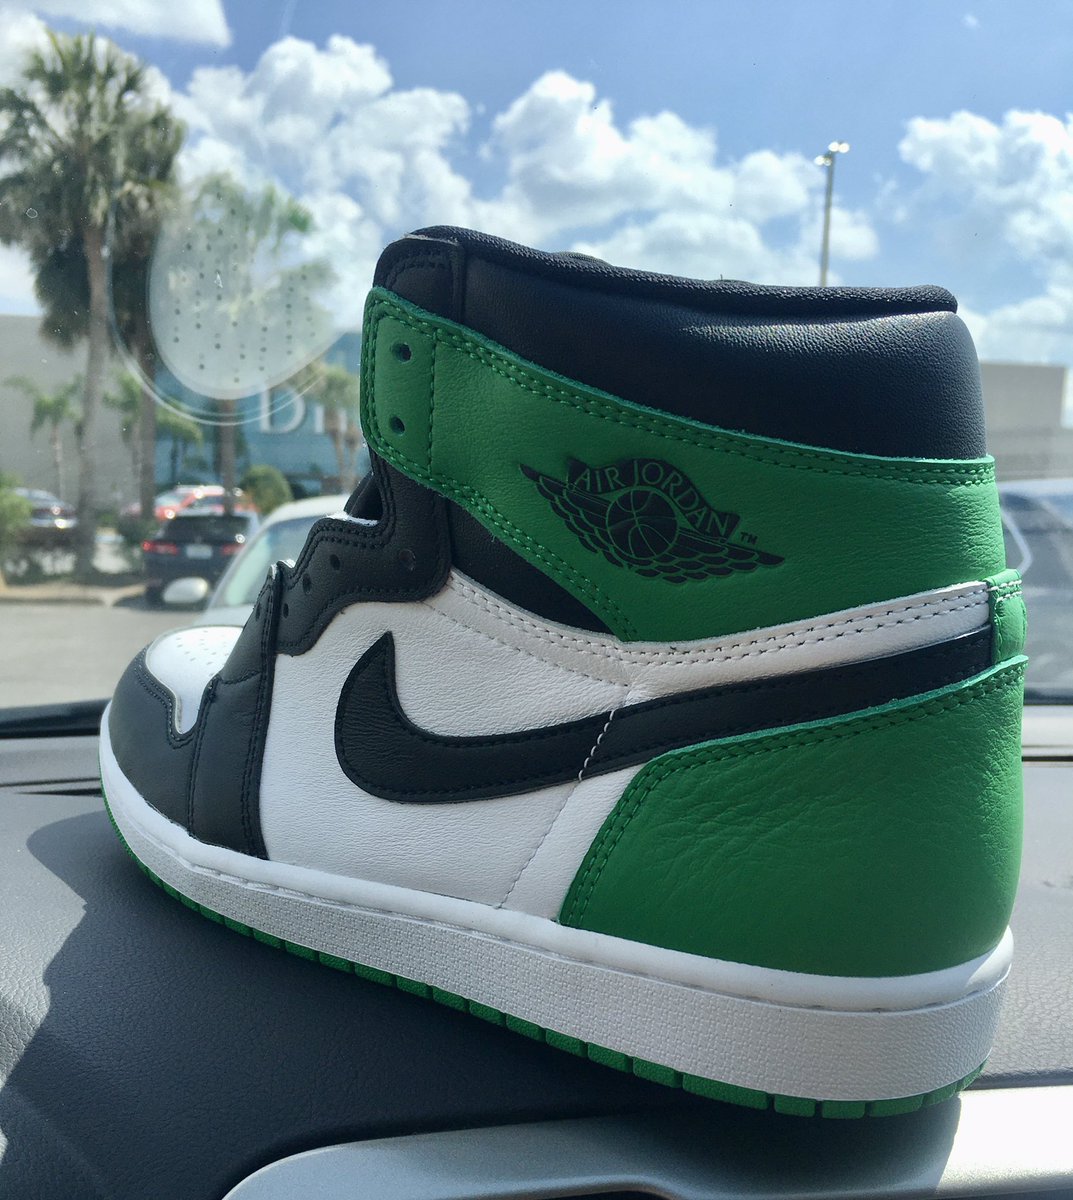 Was on the fence with these but having them in hand I’m happy I got ‘em. Love them! 🍀 👟 #AirJordan1 #yourkicksaredope #kotd #nike #AirJordan